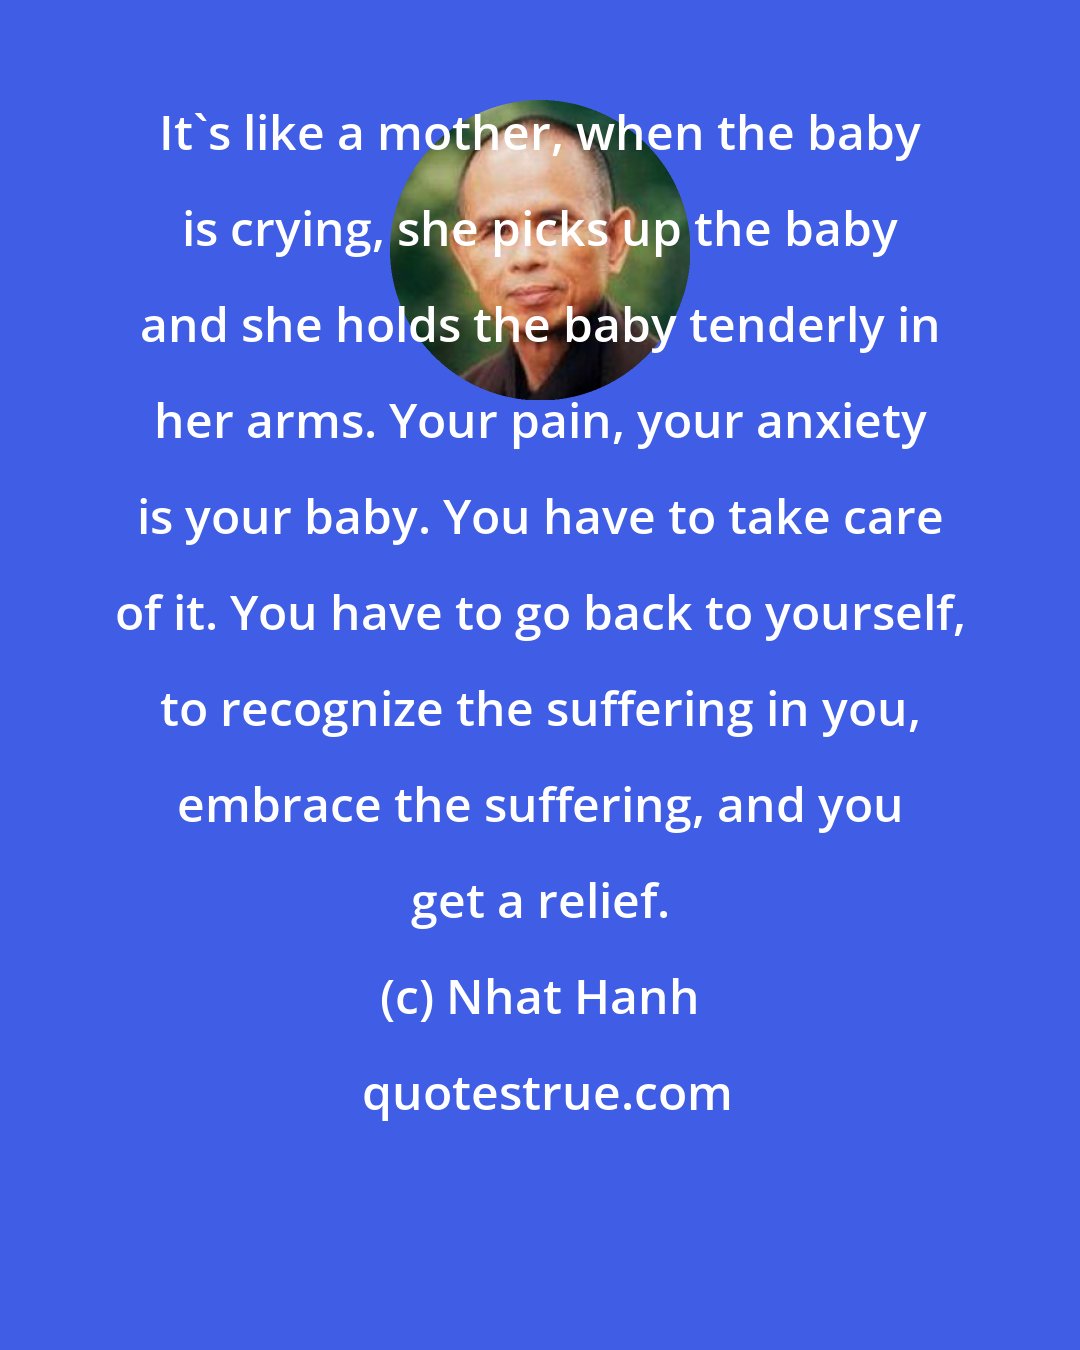 Nhat Hanh: It's like a mother, when the baby is crying, she picks up the baby and she holds the baby tenderly in her arms. Your pain, your anxiety is your baby. You have to take care of it. You have to go back to yourself, to recognize the suffering in you, embrace the suffering, and you get a relief.